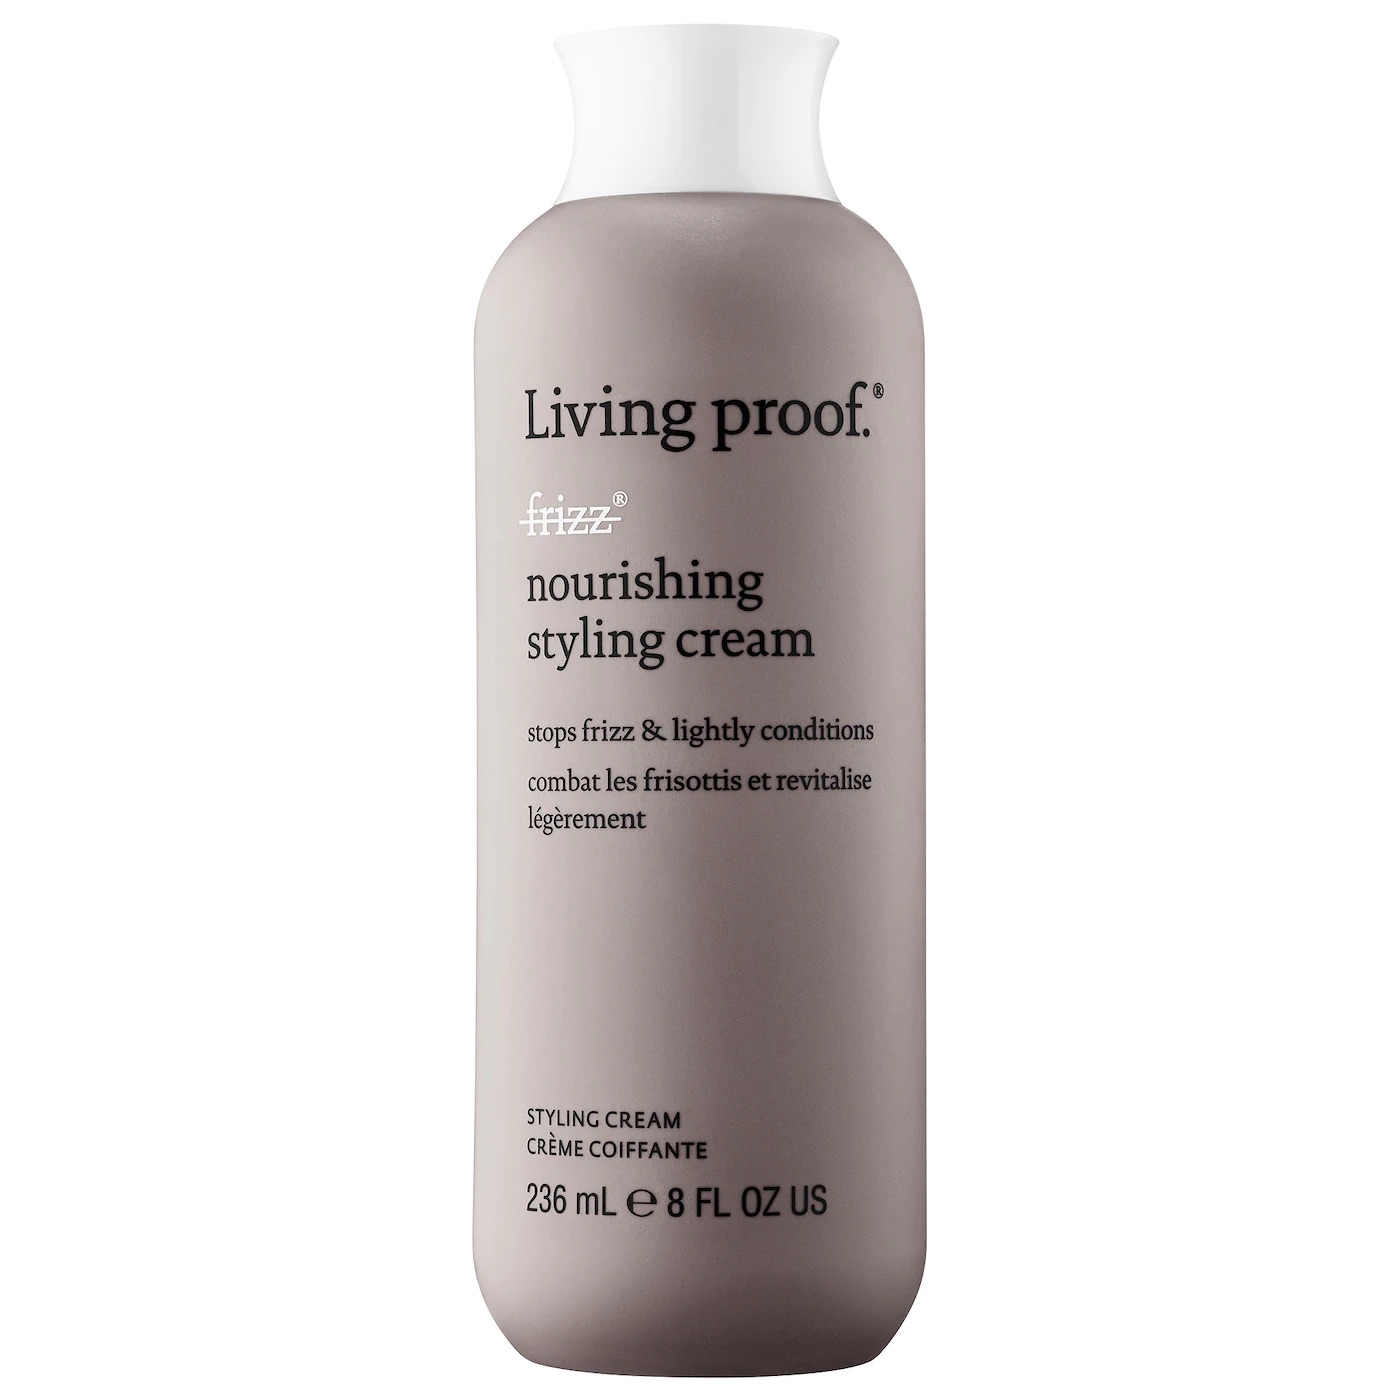 A gray bottle of Living Proof styling cream.